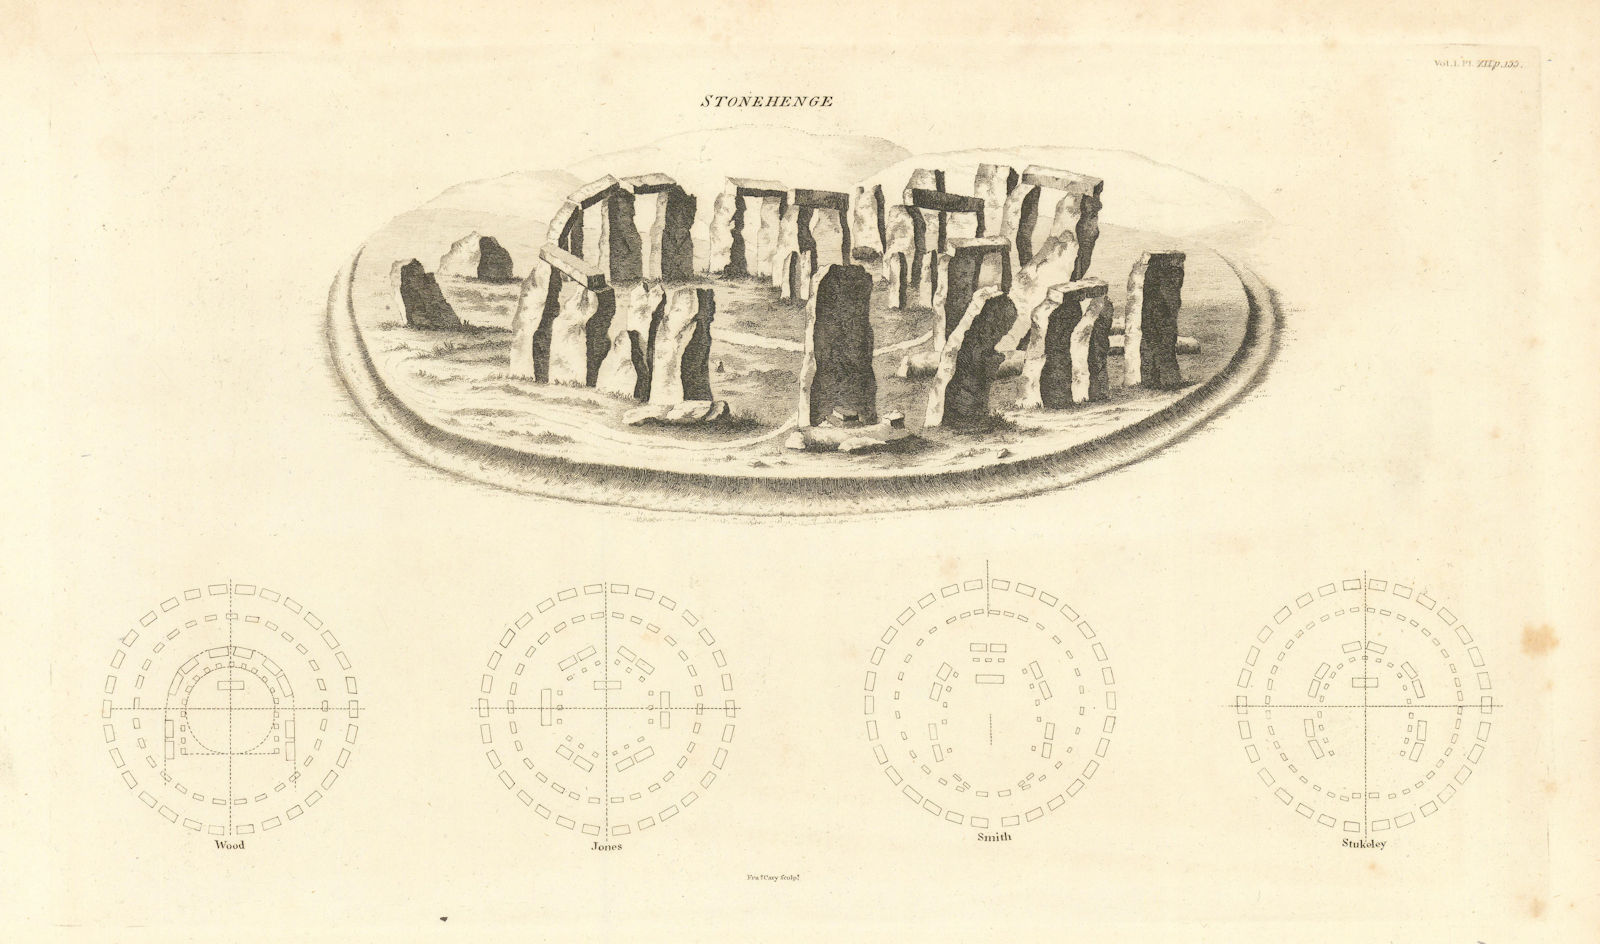 Associate Product Stonehenge view & ground plans by Wood, Jones, Smith & Stukeley. CARY 1806 map